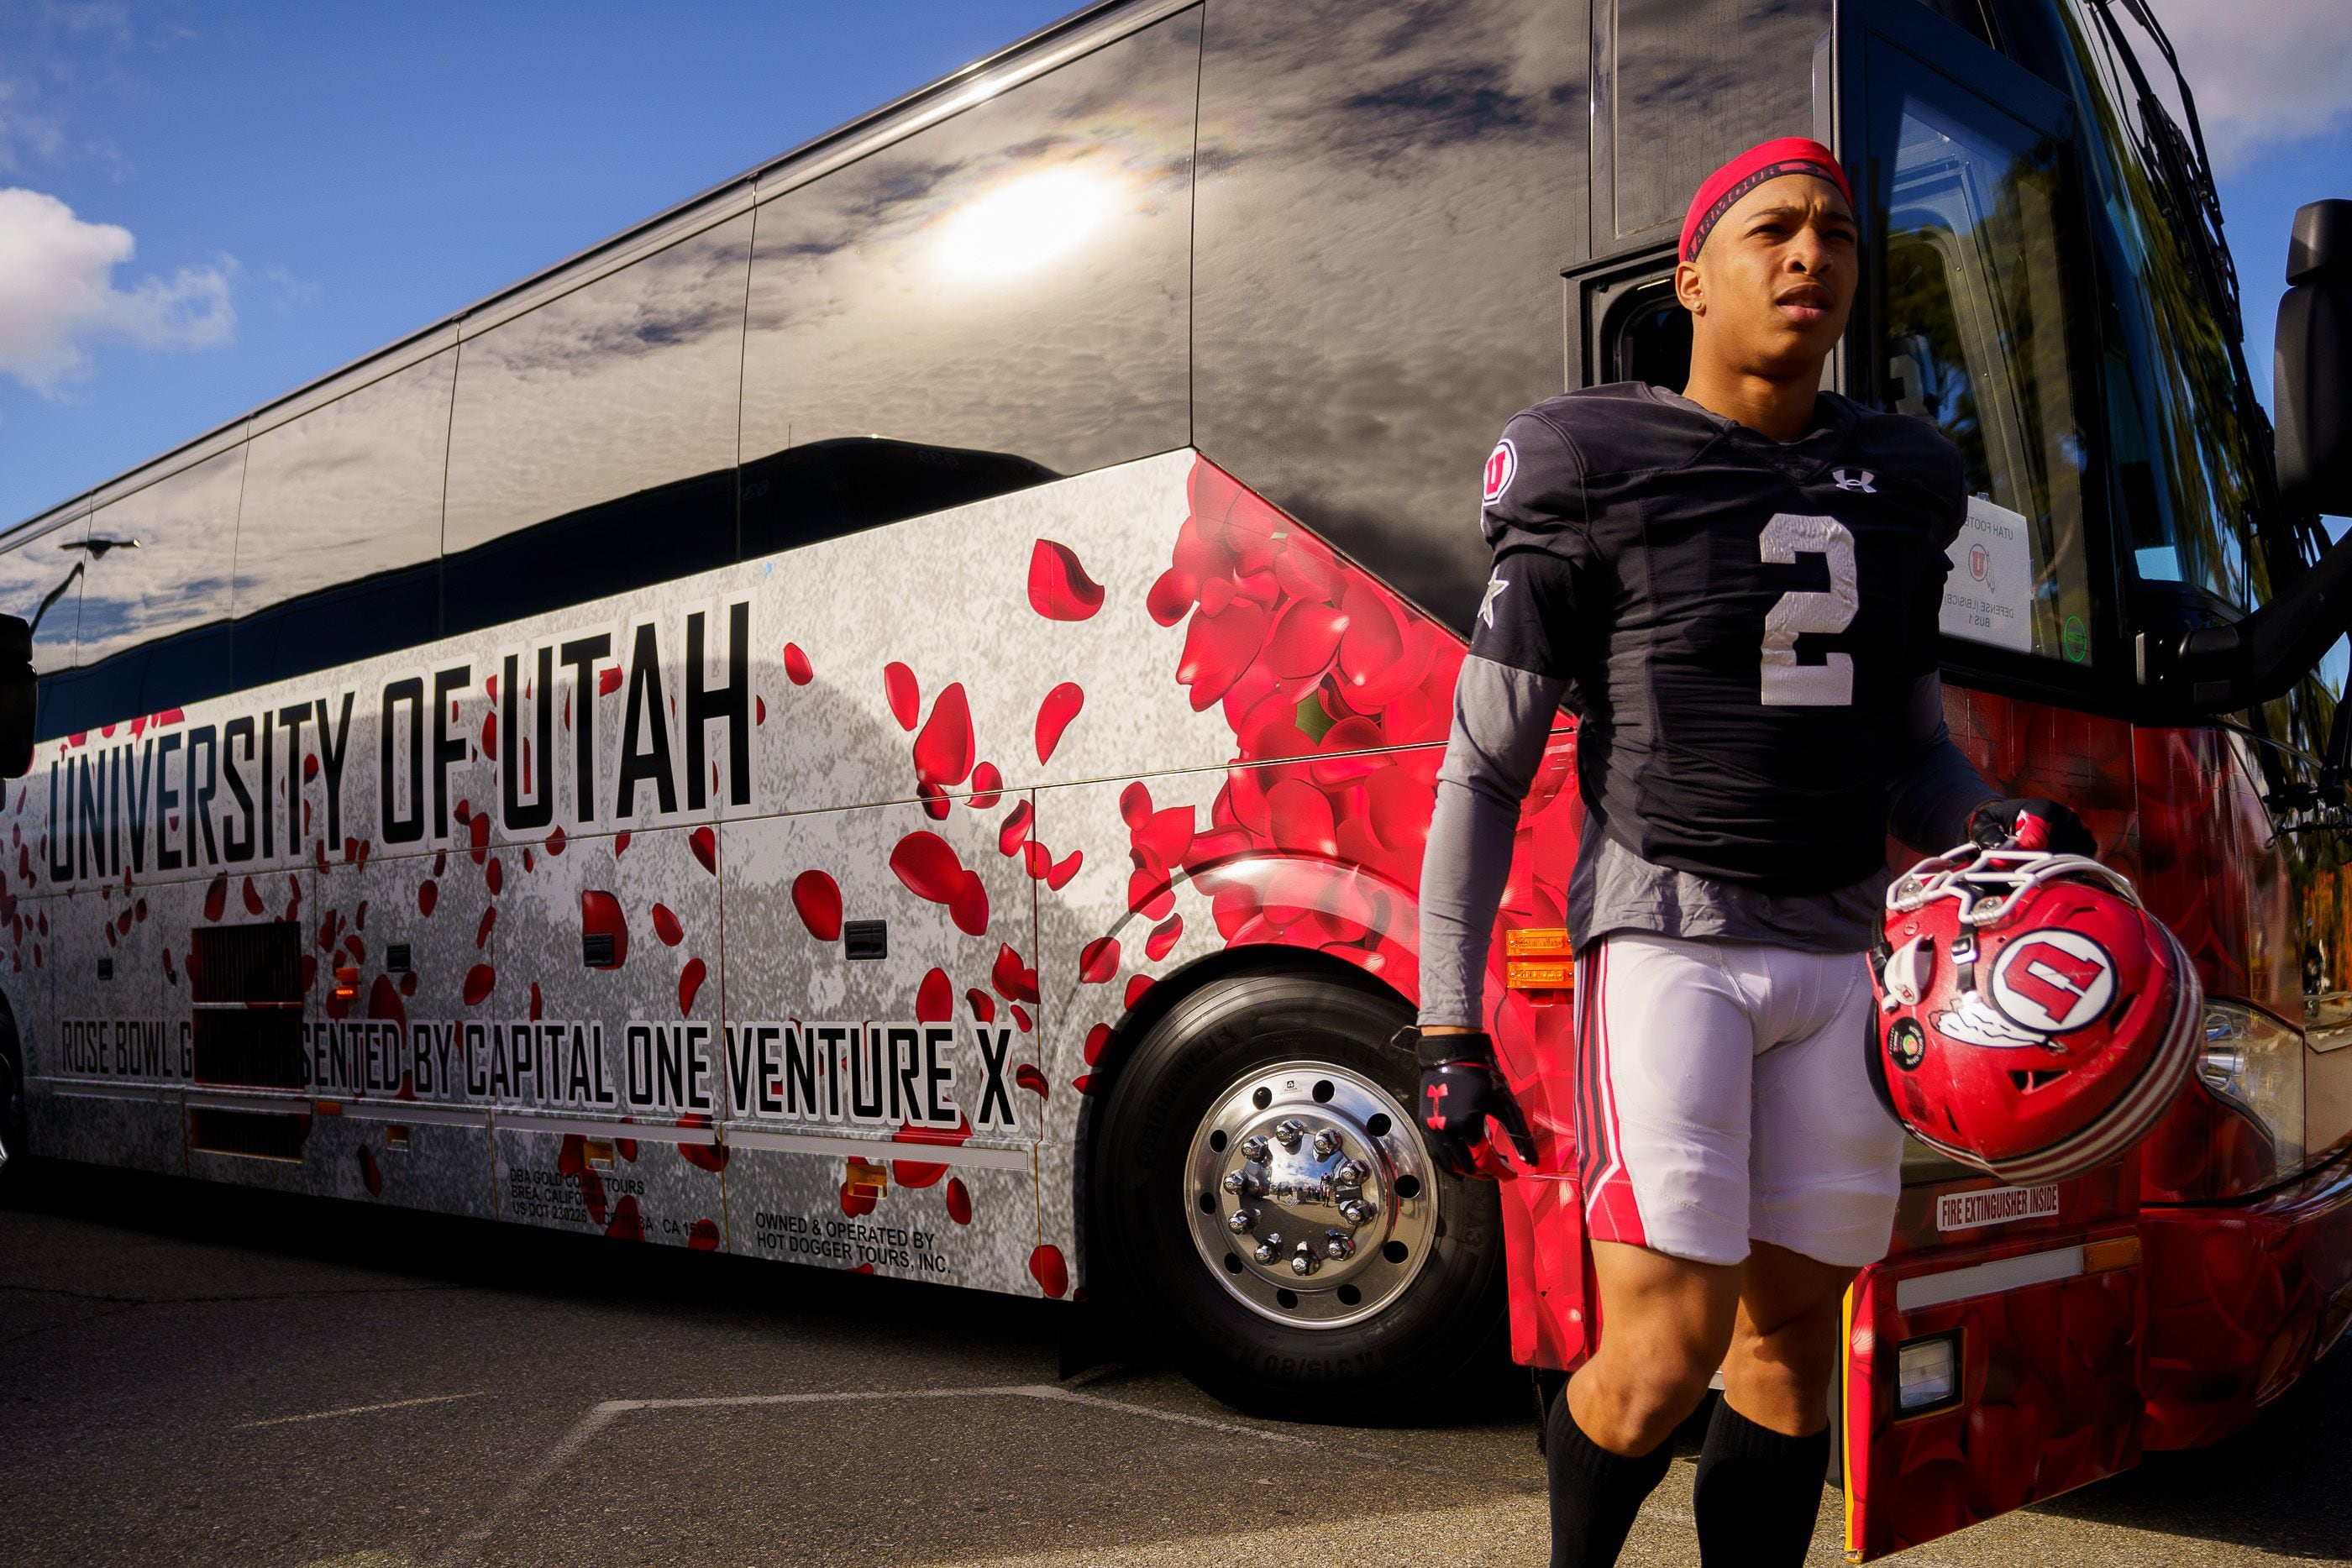 (Trent Nelson | The Salt Lake Tribune) Micah Bernard as the University of Utah football team arrives to a practice session for the Rose Bowl at Dignity Health Sports Park in Carson, Calif., on Tuesday, Dec. 28, 2021.